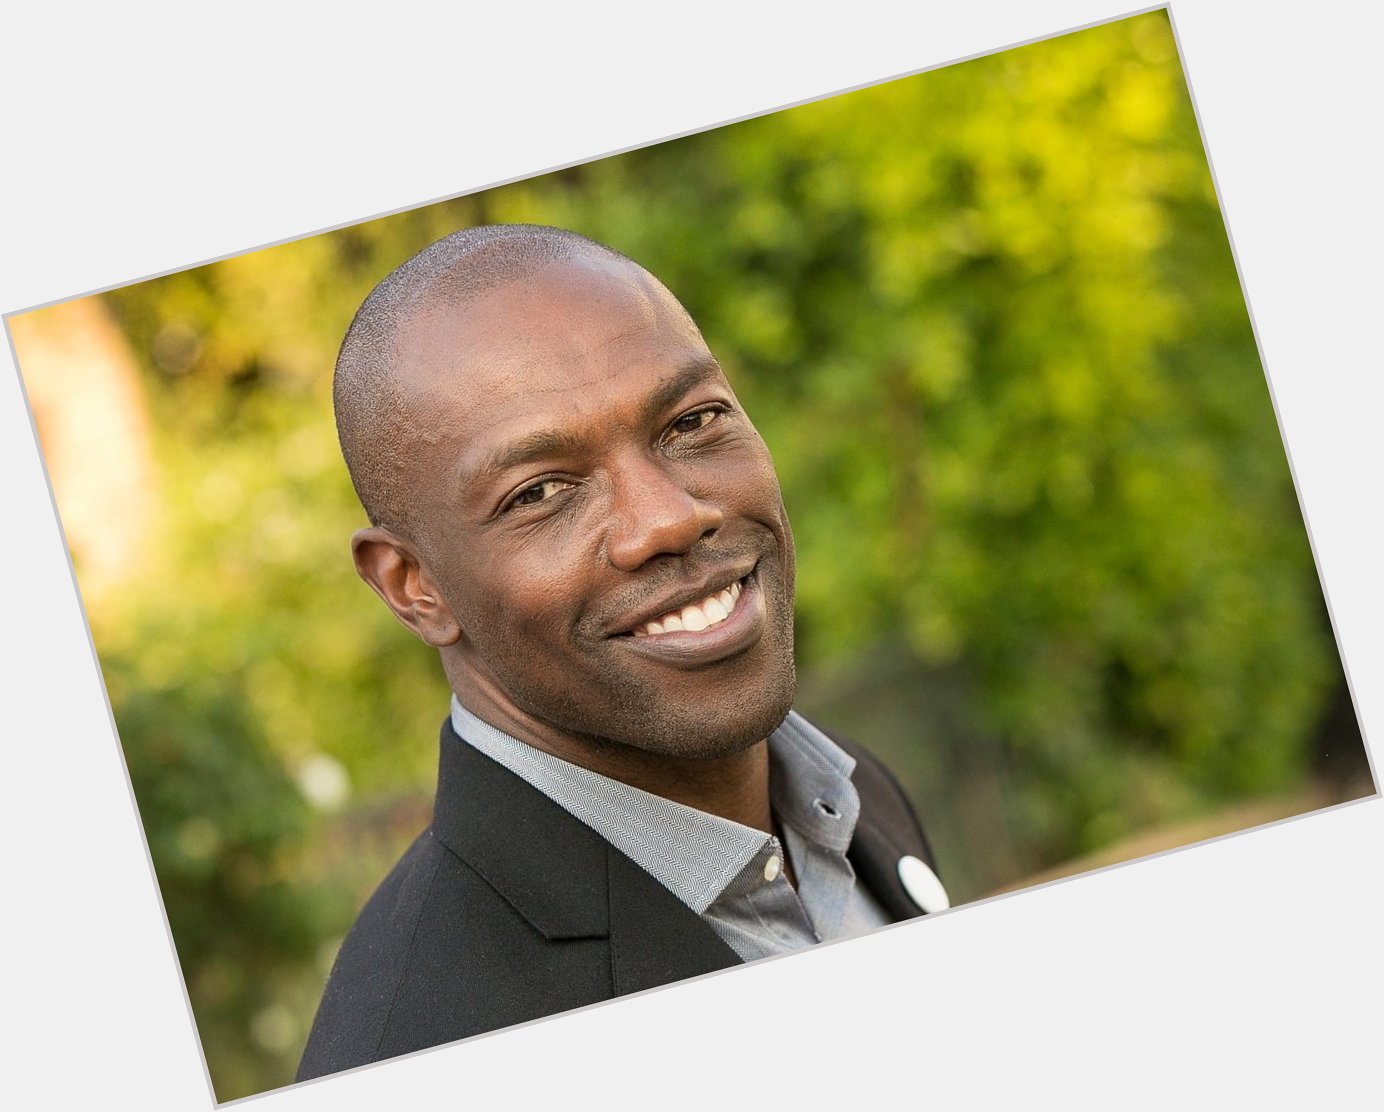 HAPPY BELATED BIRTHDAY TO NFL STAR TERRELL OWENS! HE TURNED 46 ON SATURDAY, DEC. 7TH! WISHING HIM MANY MORE! 